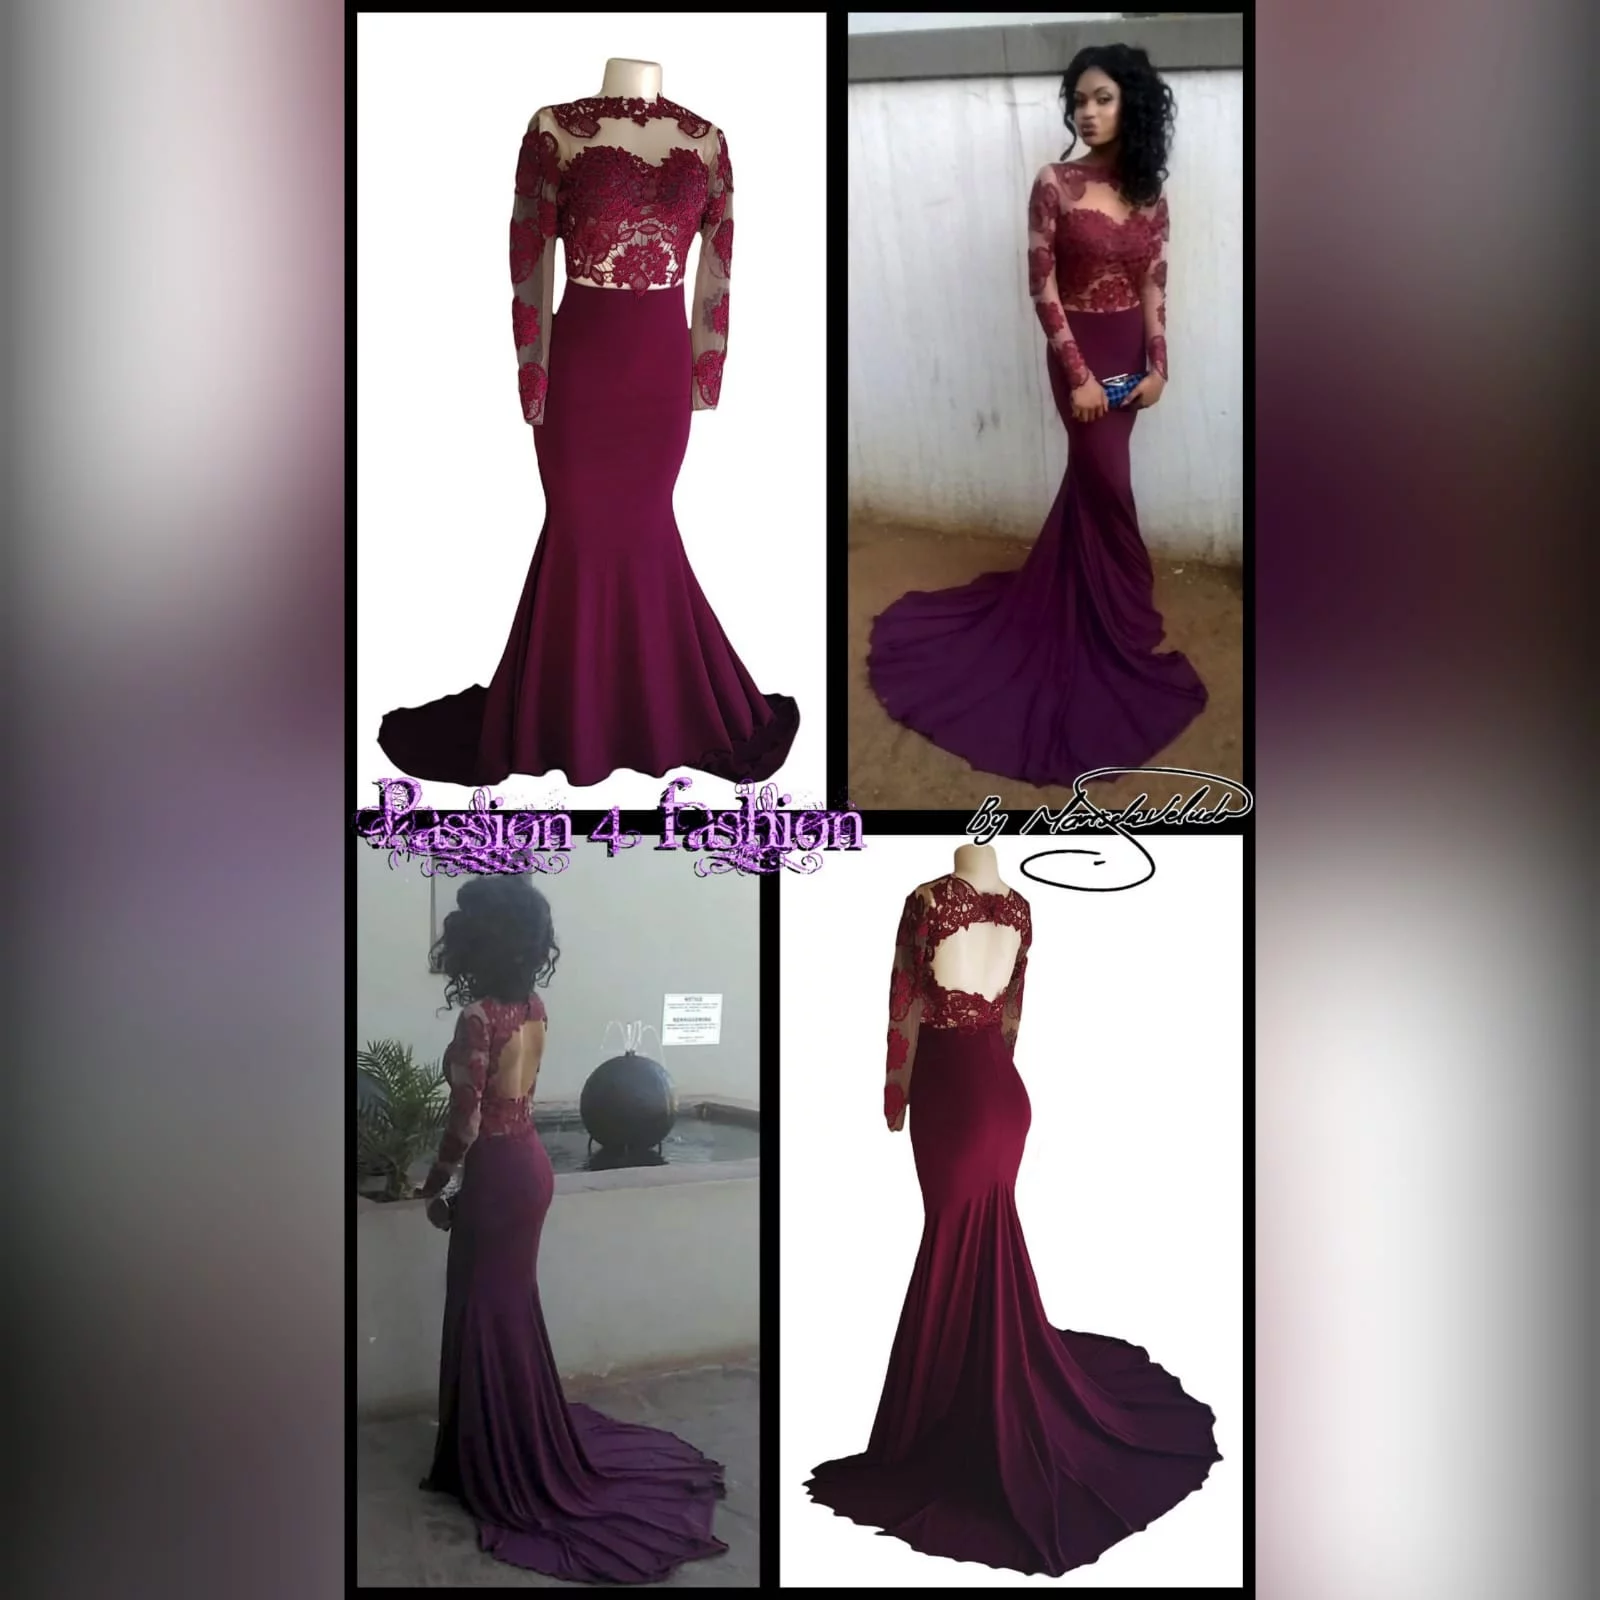 Burgundy soft mermaid illusion lace bodice prom dress 5 burgundy soft mermaid illusion lace bodice prom dress with a rounded open back with lace long sleeves and a train.